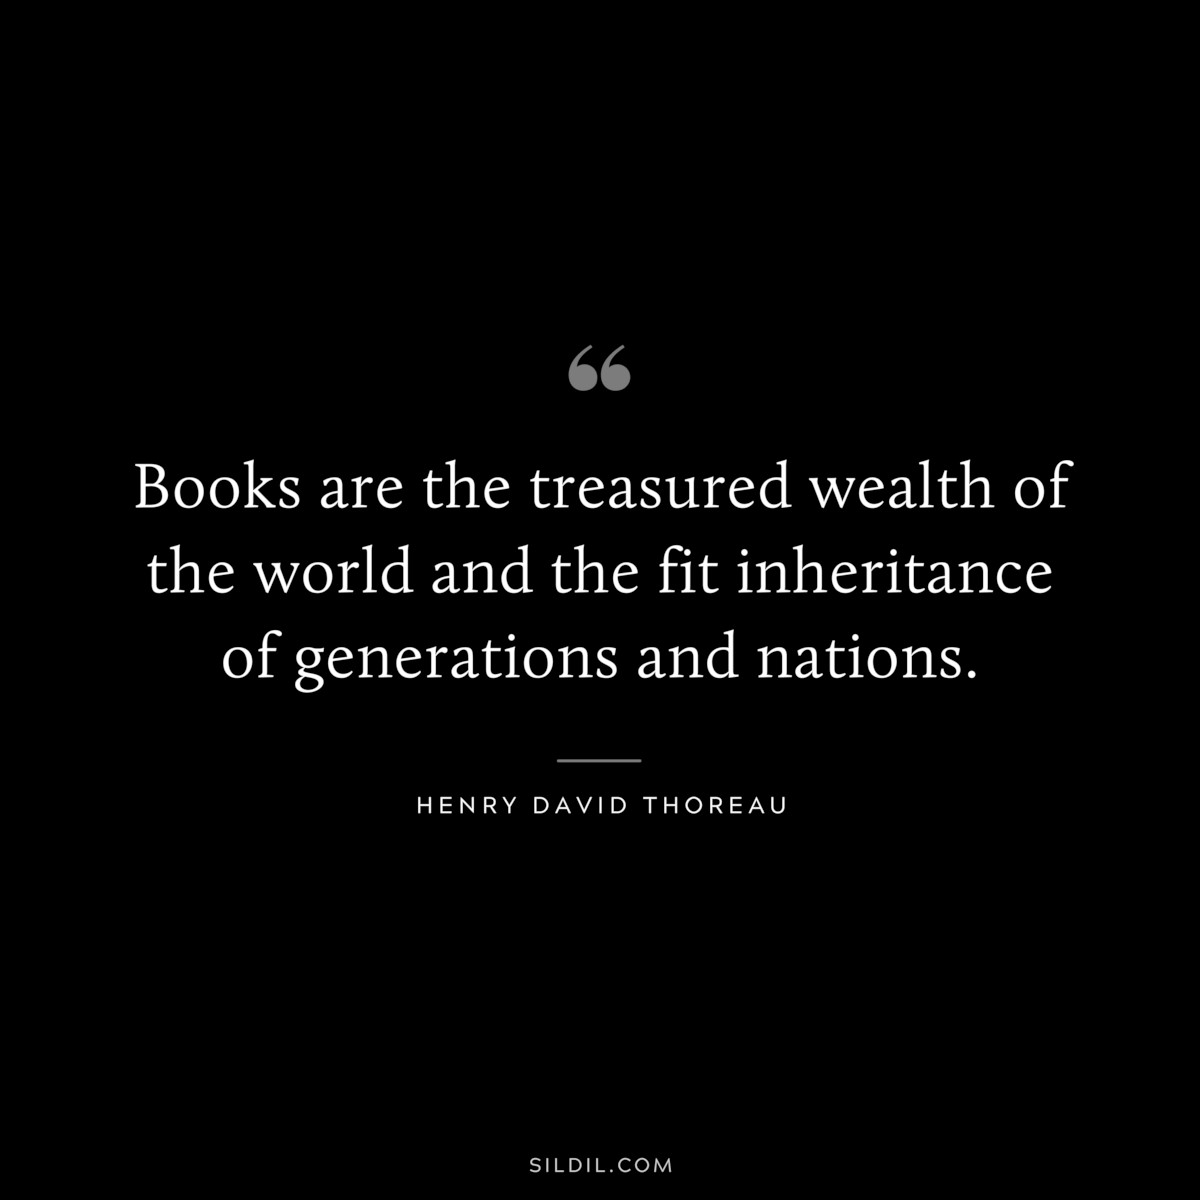 Books are the treasured wealth of the world and the fit inheritance of generations and nations. — Henry David Thoreau